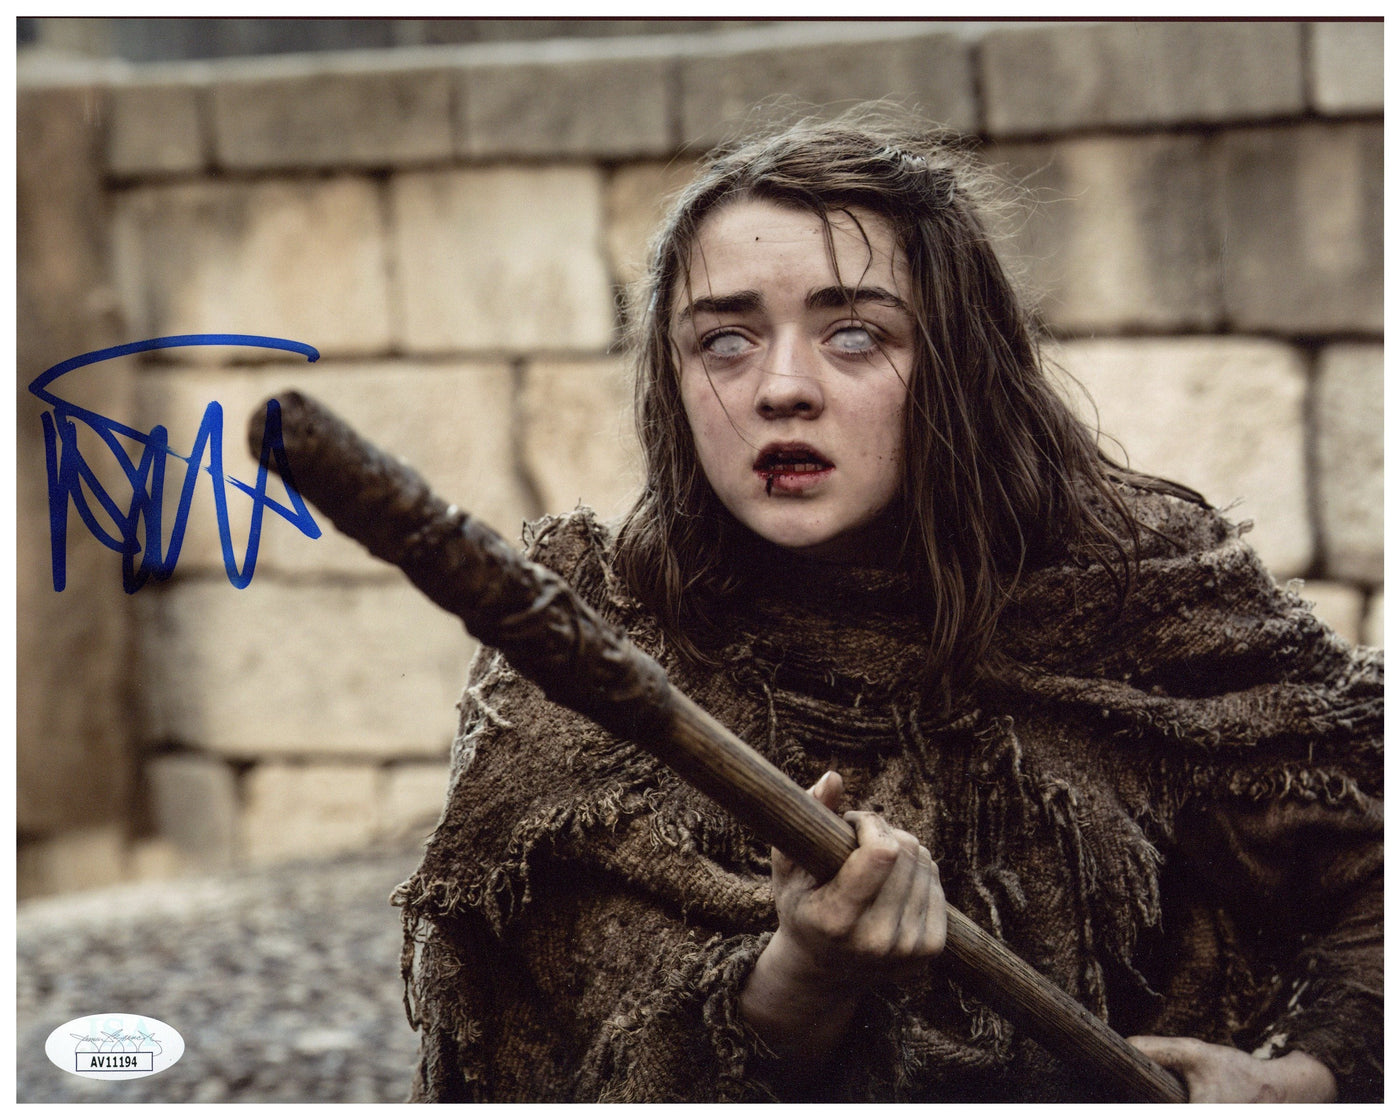 Maisie Williams Signed 8x10 Photo Game of Thrones Arya Autographed JSA COA 2